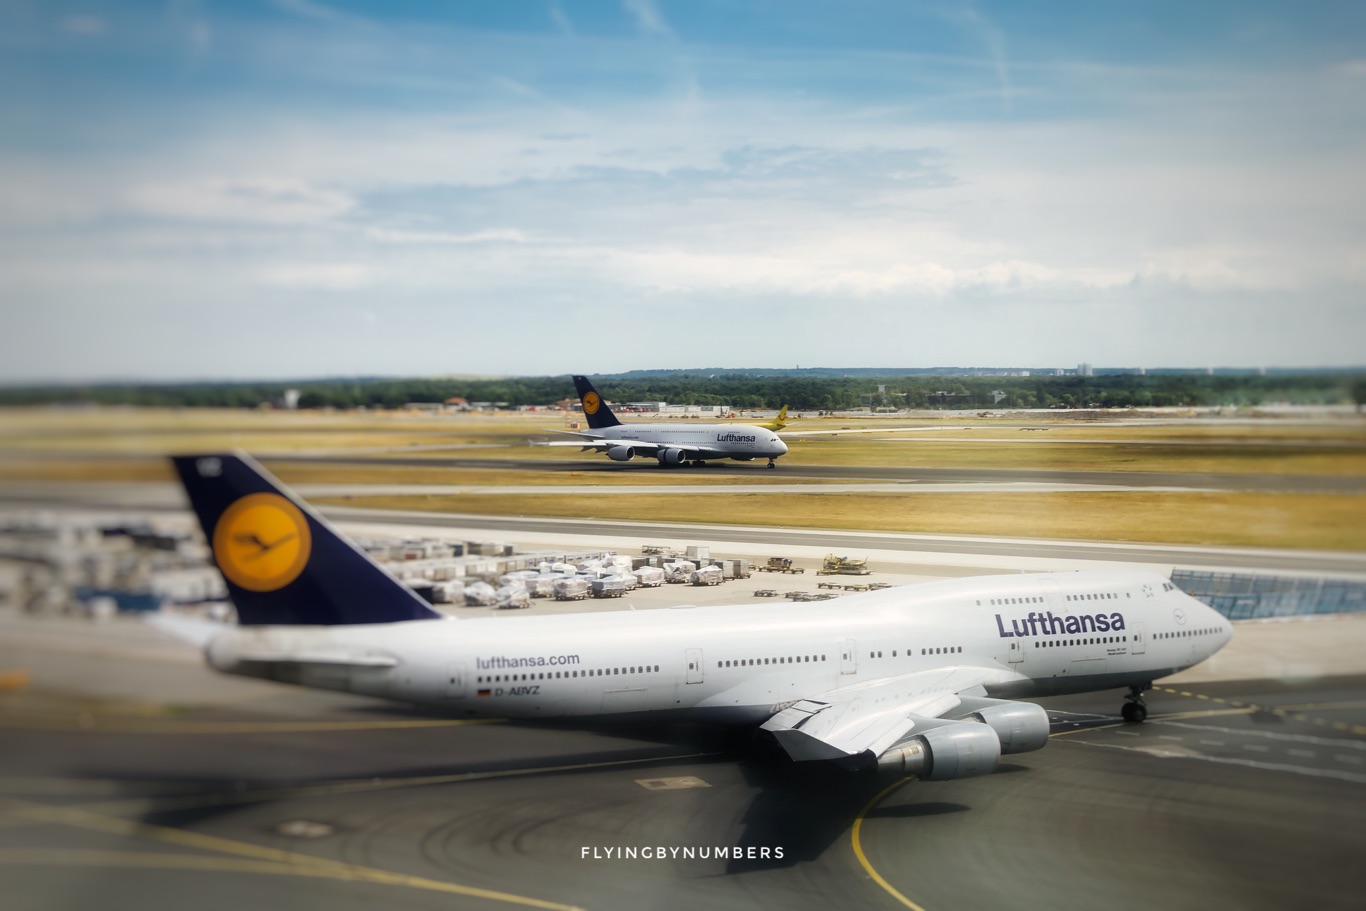 Lufthansa 747 alongside a landing a380, the two aircraft with the largest amount of flight attendants required